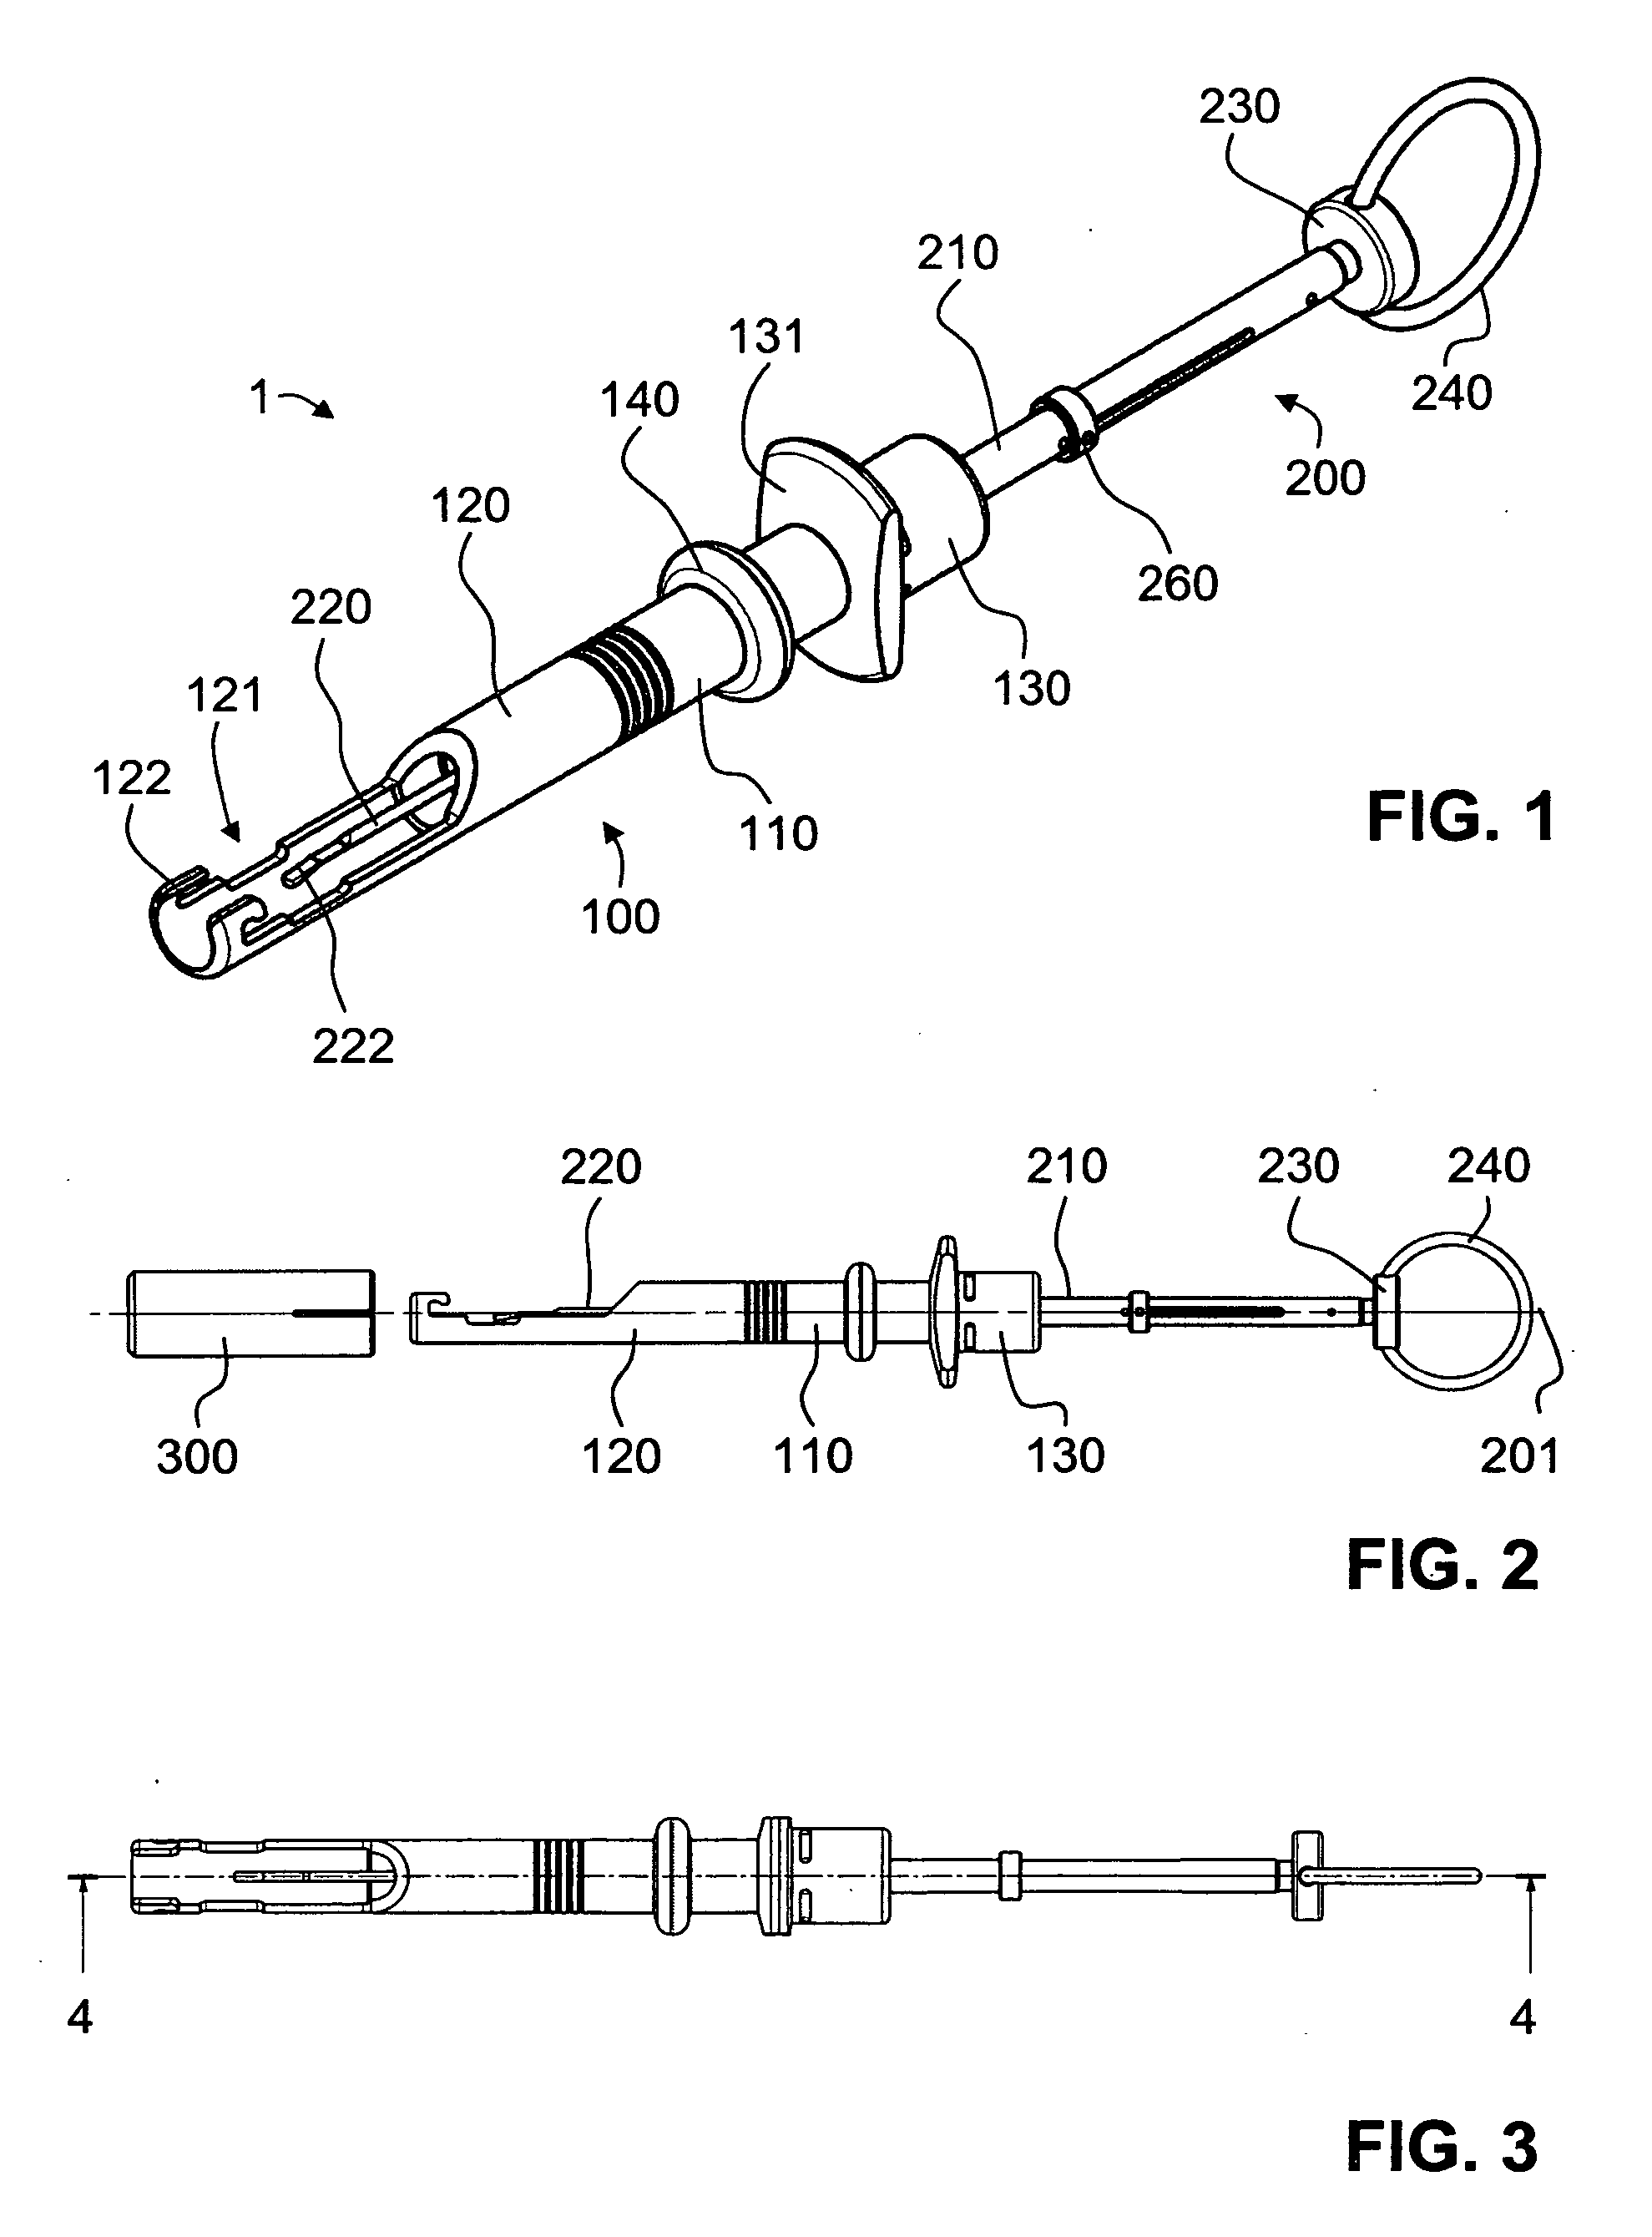 Spring-based injector for a intraocular lens